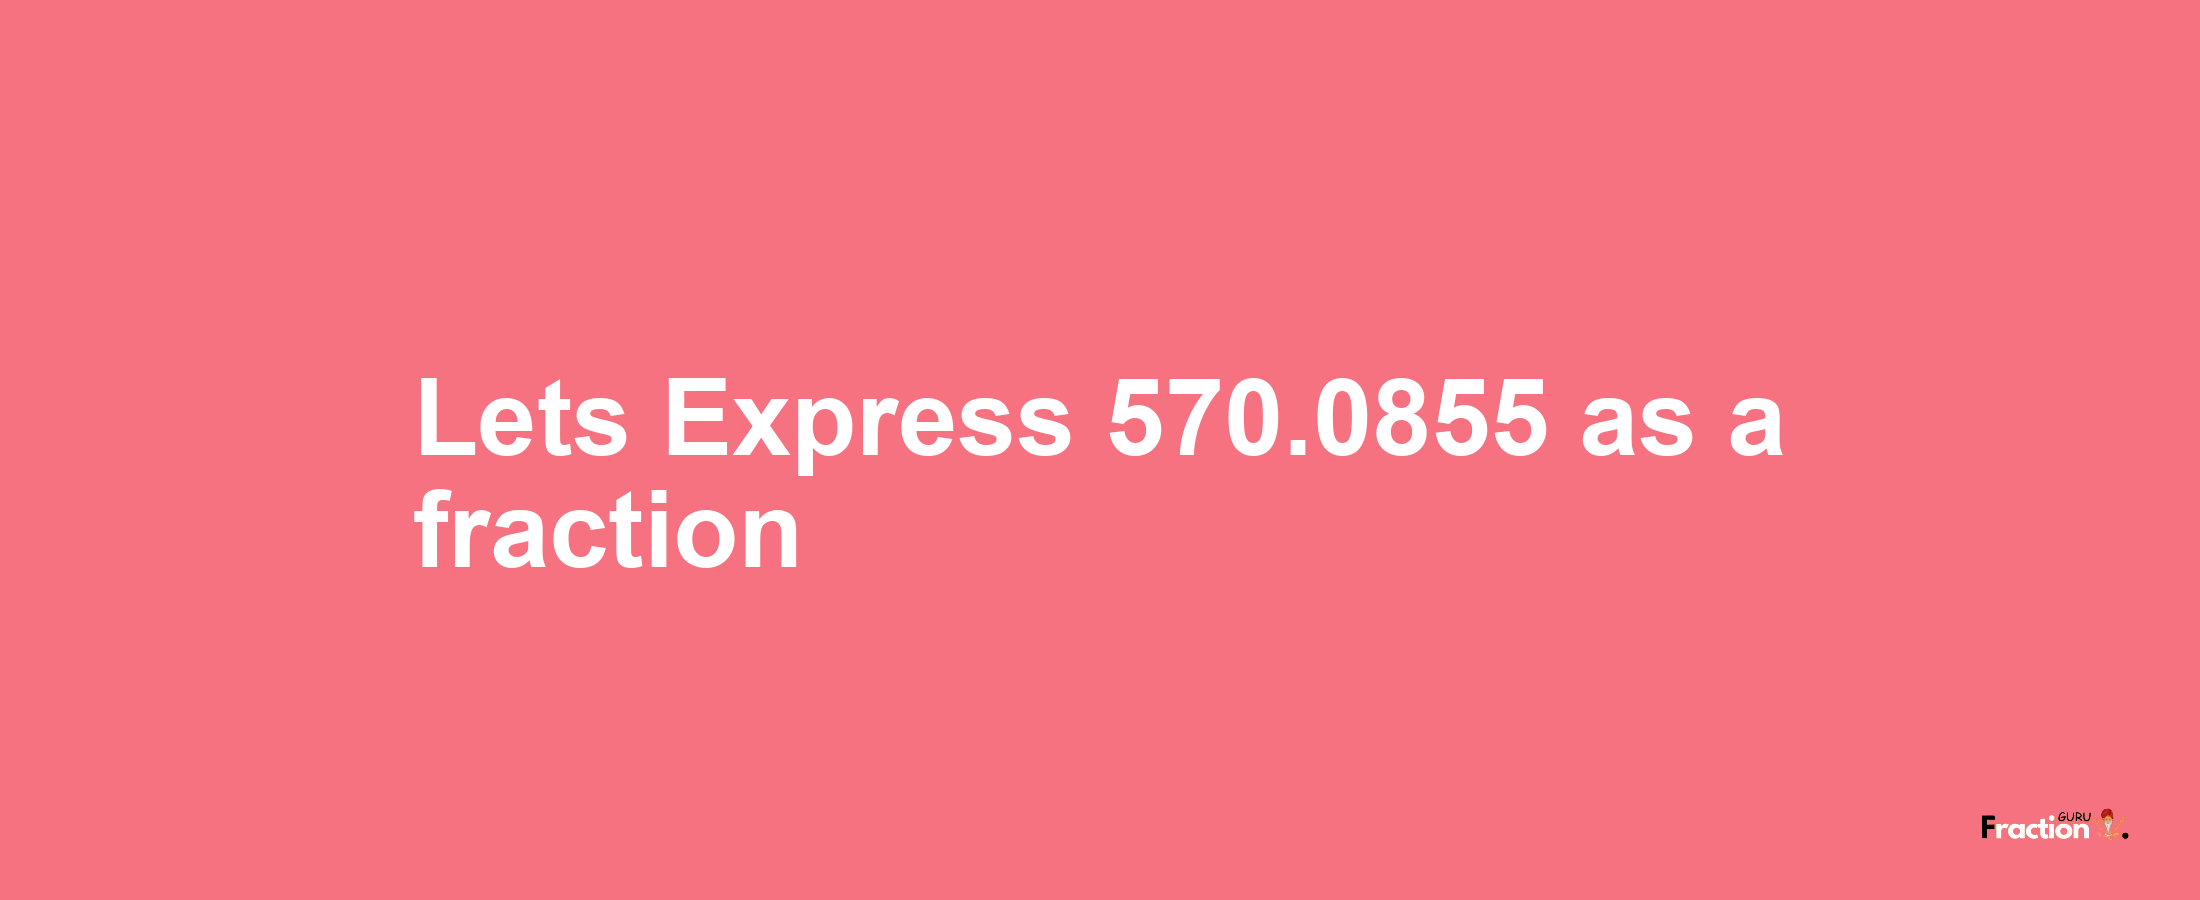 Lets Express 570.0855 as afraction